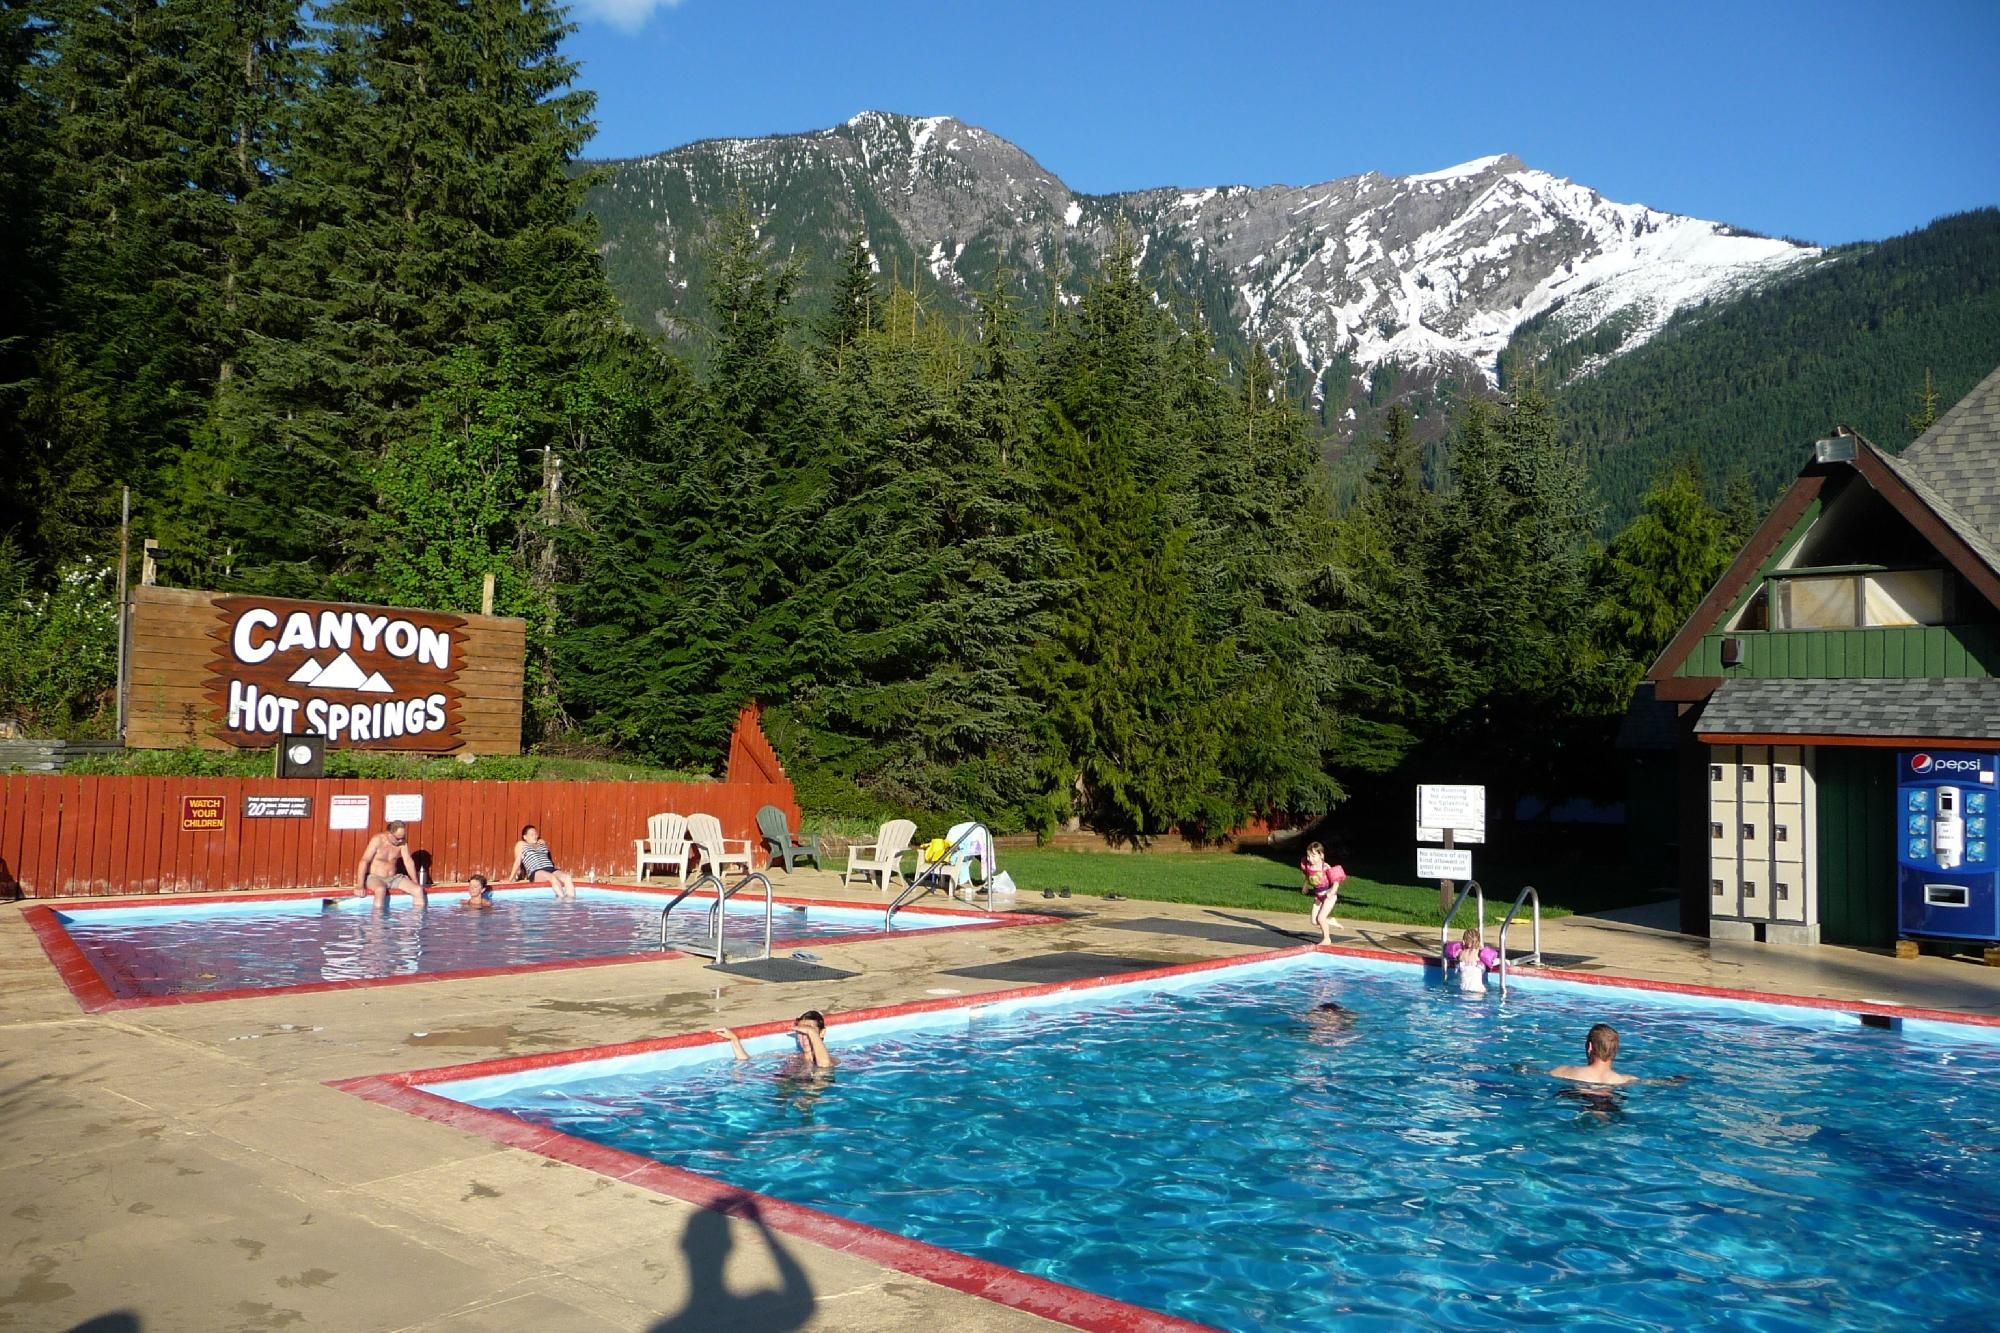 Canyon Hot Springs in British Columbia